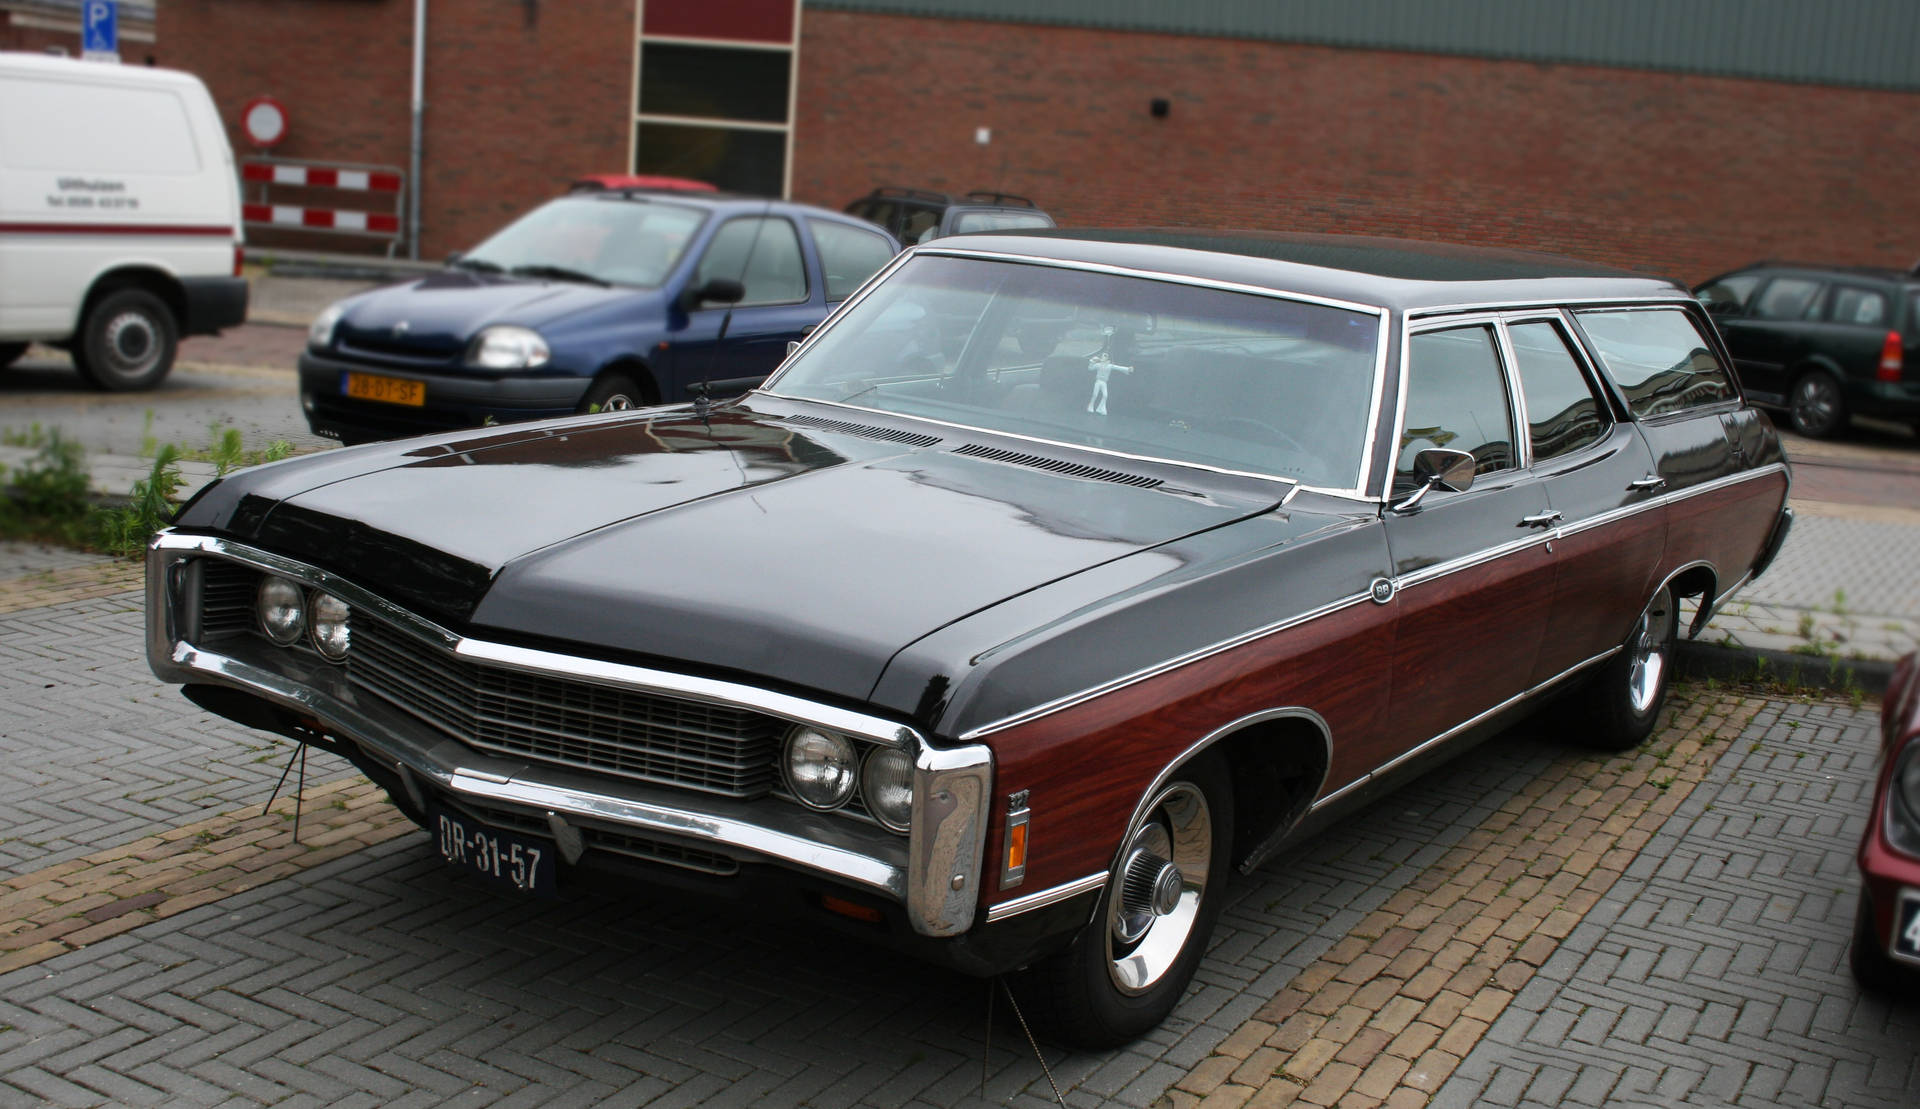 Classic Elegance With The 1967 Chevrolet Impala Wagon